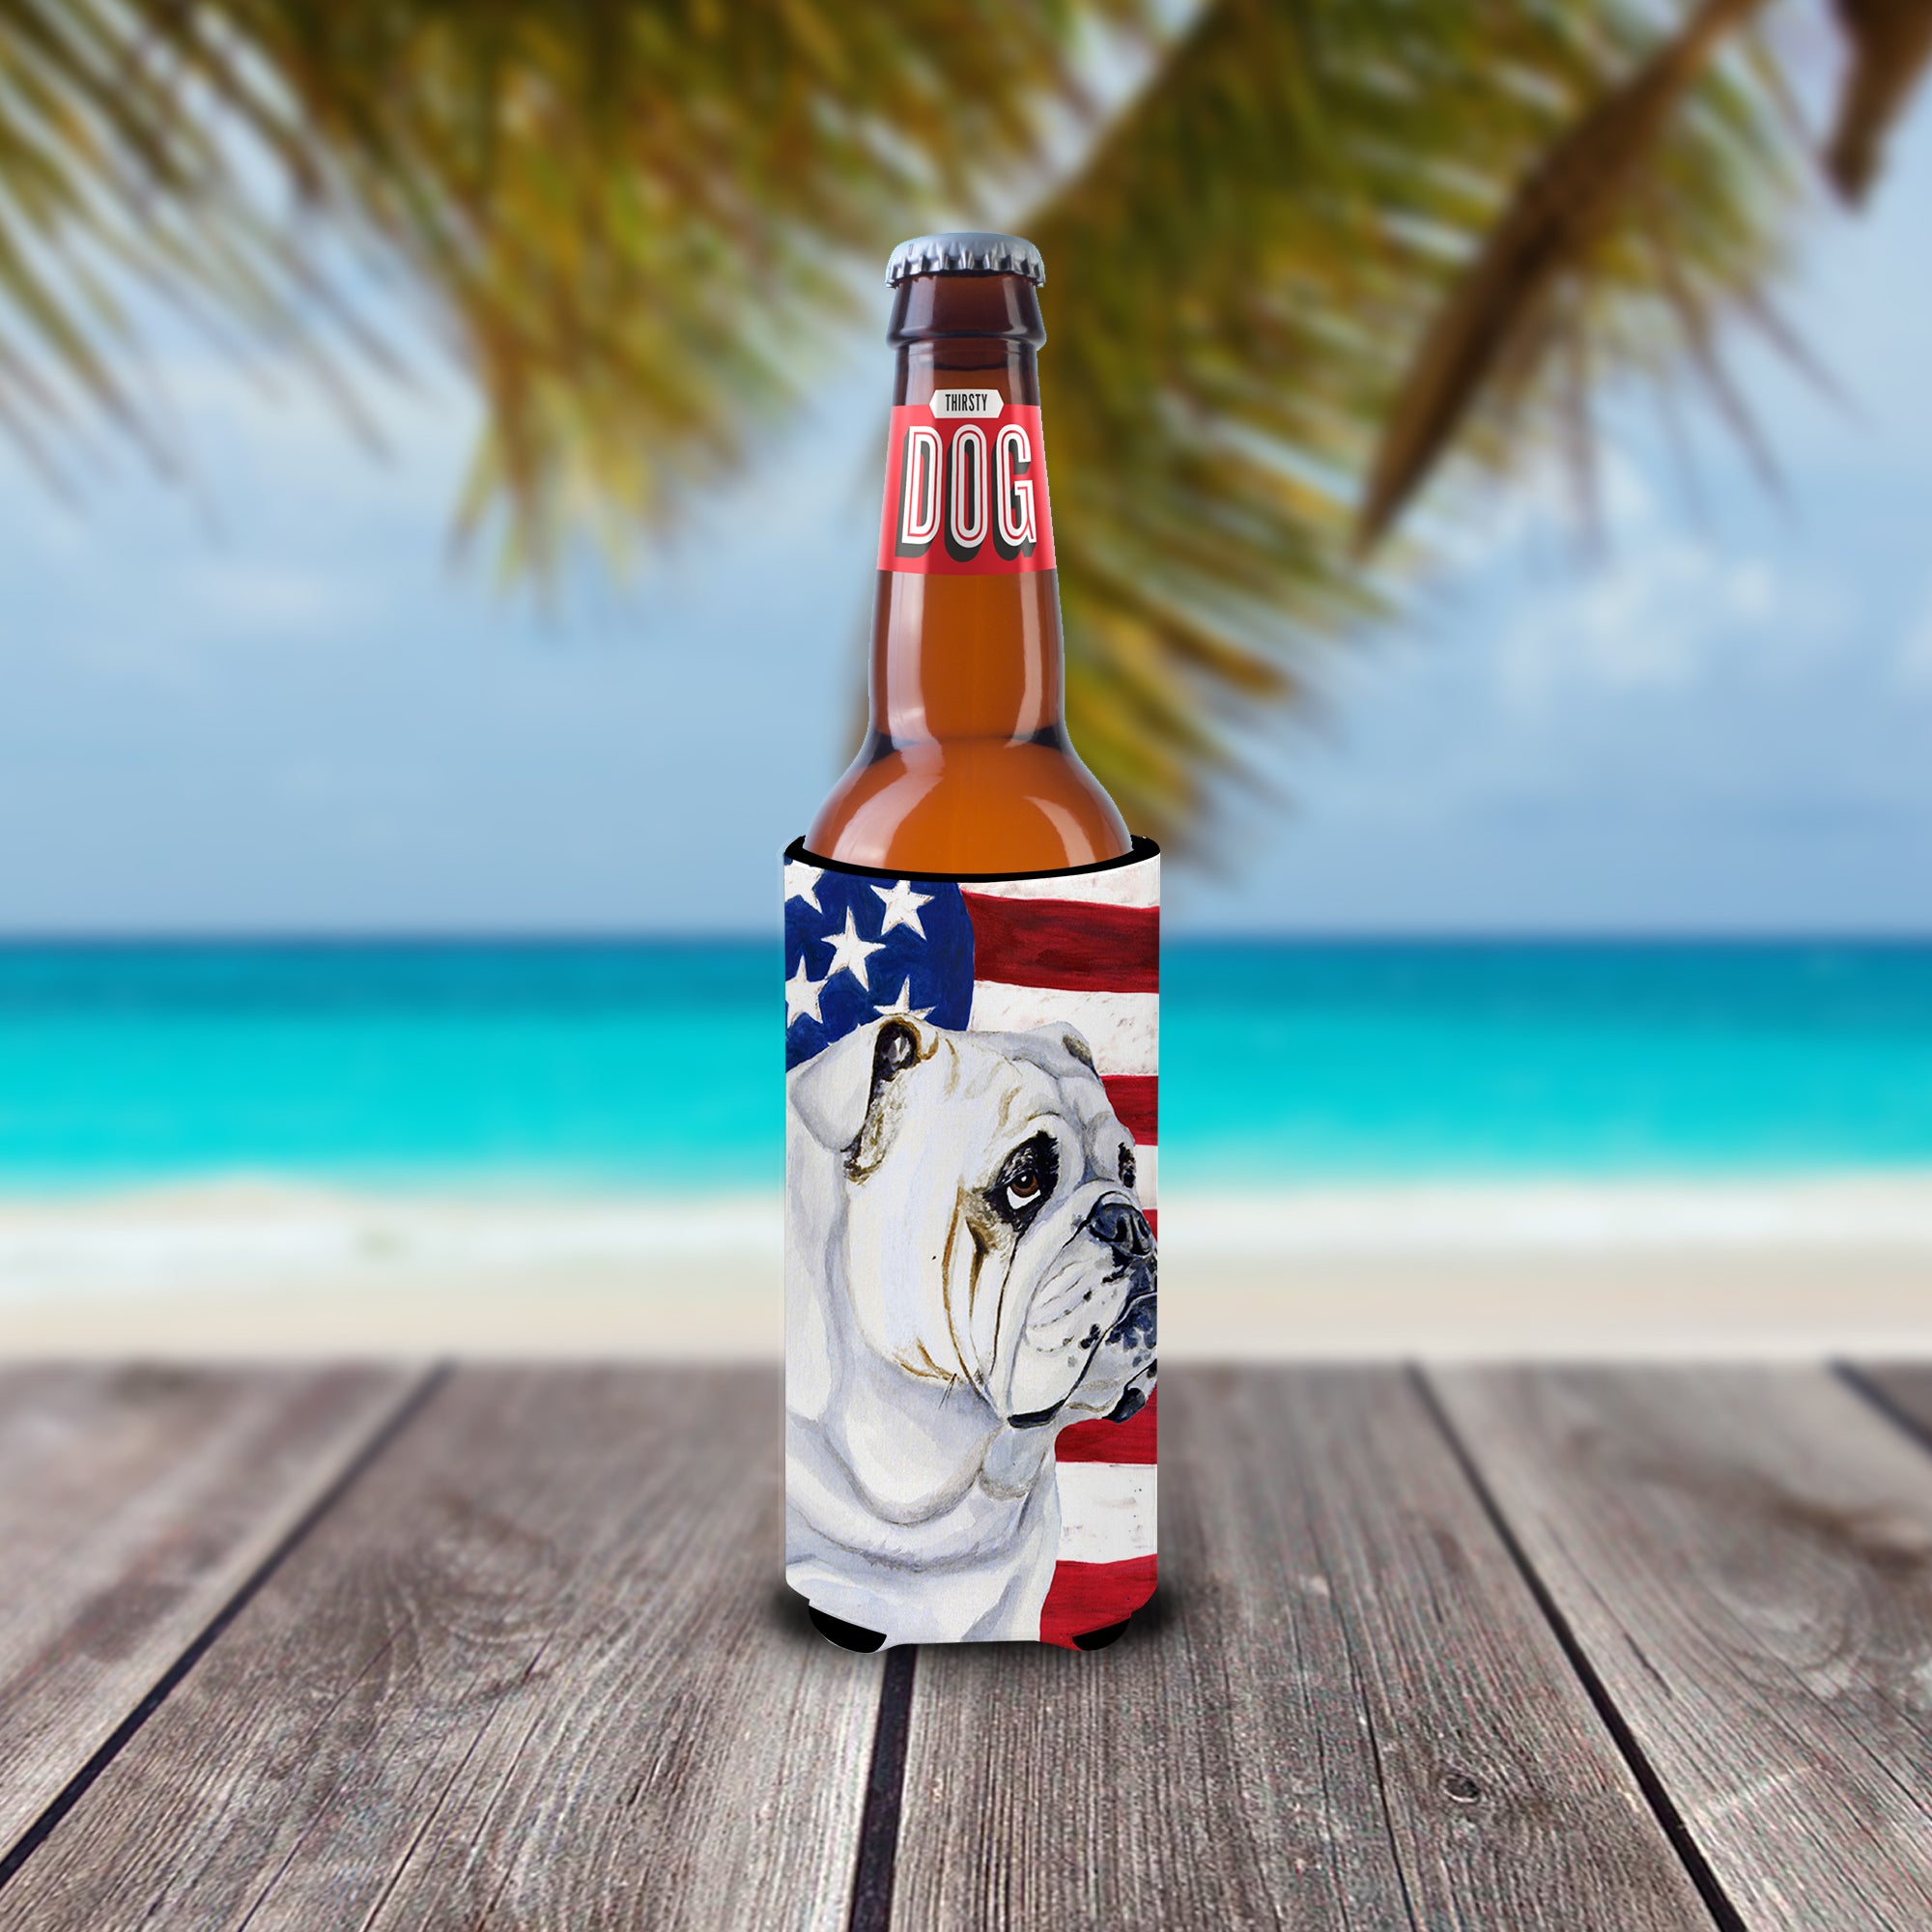 USA American Flag with English Bulldog Ultra Beverage Insulators for slim cans LH9019MUK.